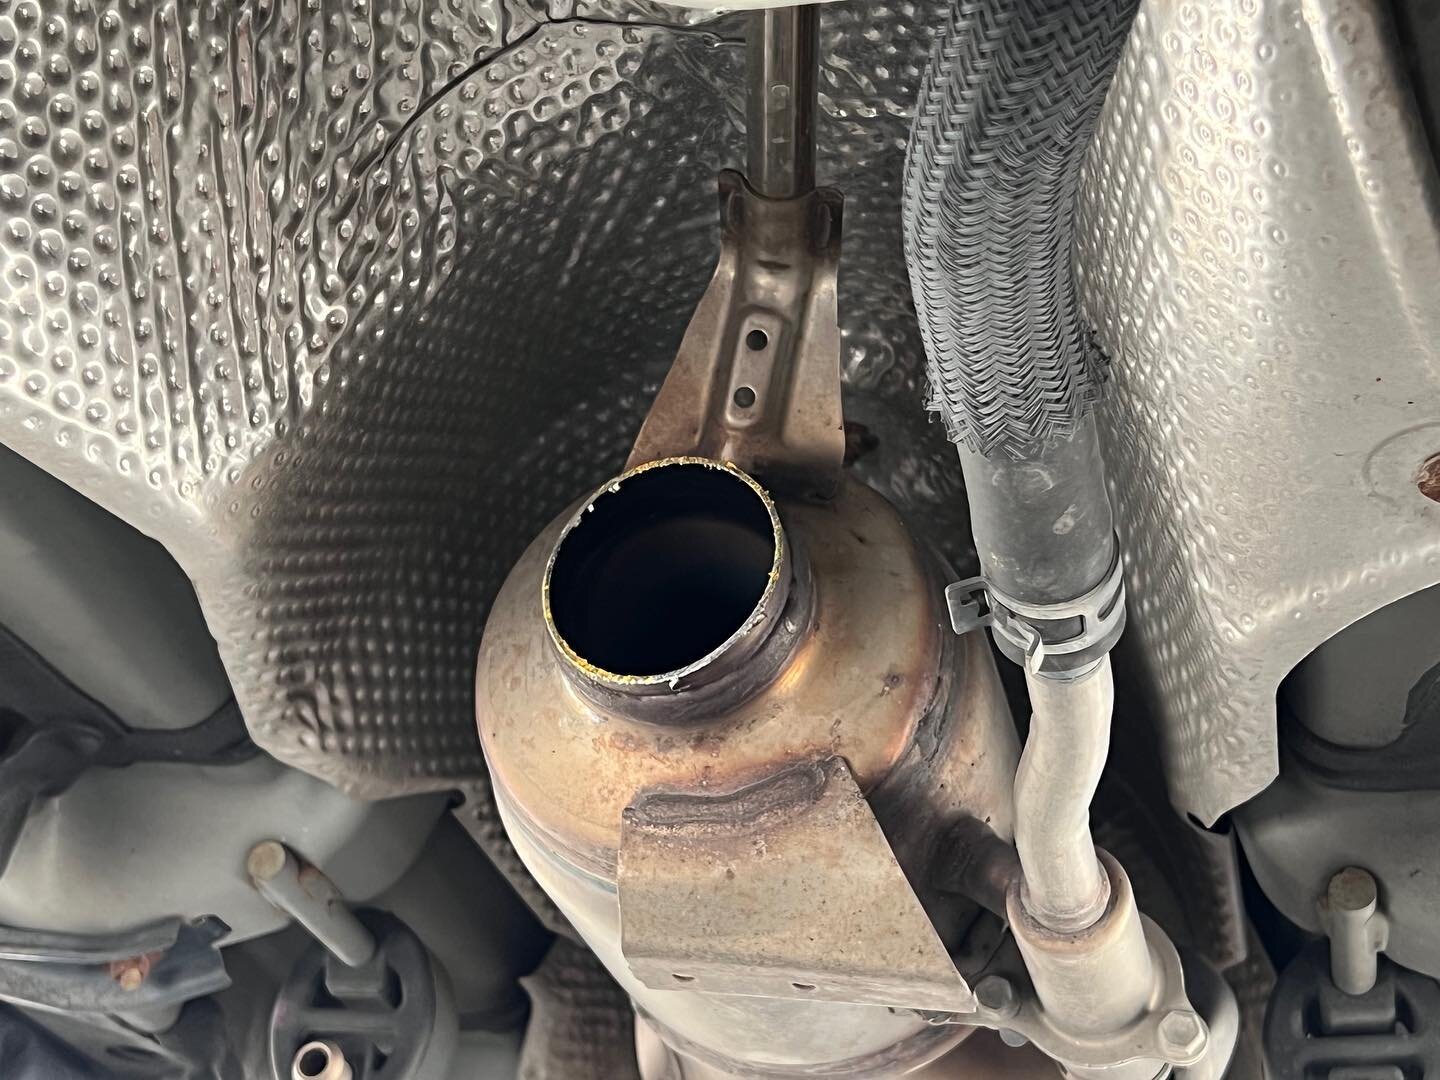 Apparently stealing catalytic converters is a thing.  Last night someone cut mine out of my Prius. They are out-of-stock nationwide and it will be $3000 to fix it, once they are in stock.  Happy Wednesday ya&rsquo;ll!  #prius #bitchstolemycatalyticco